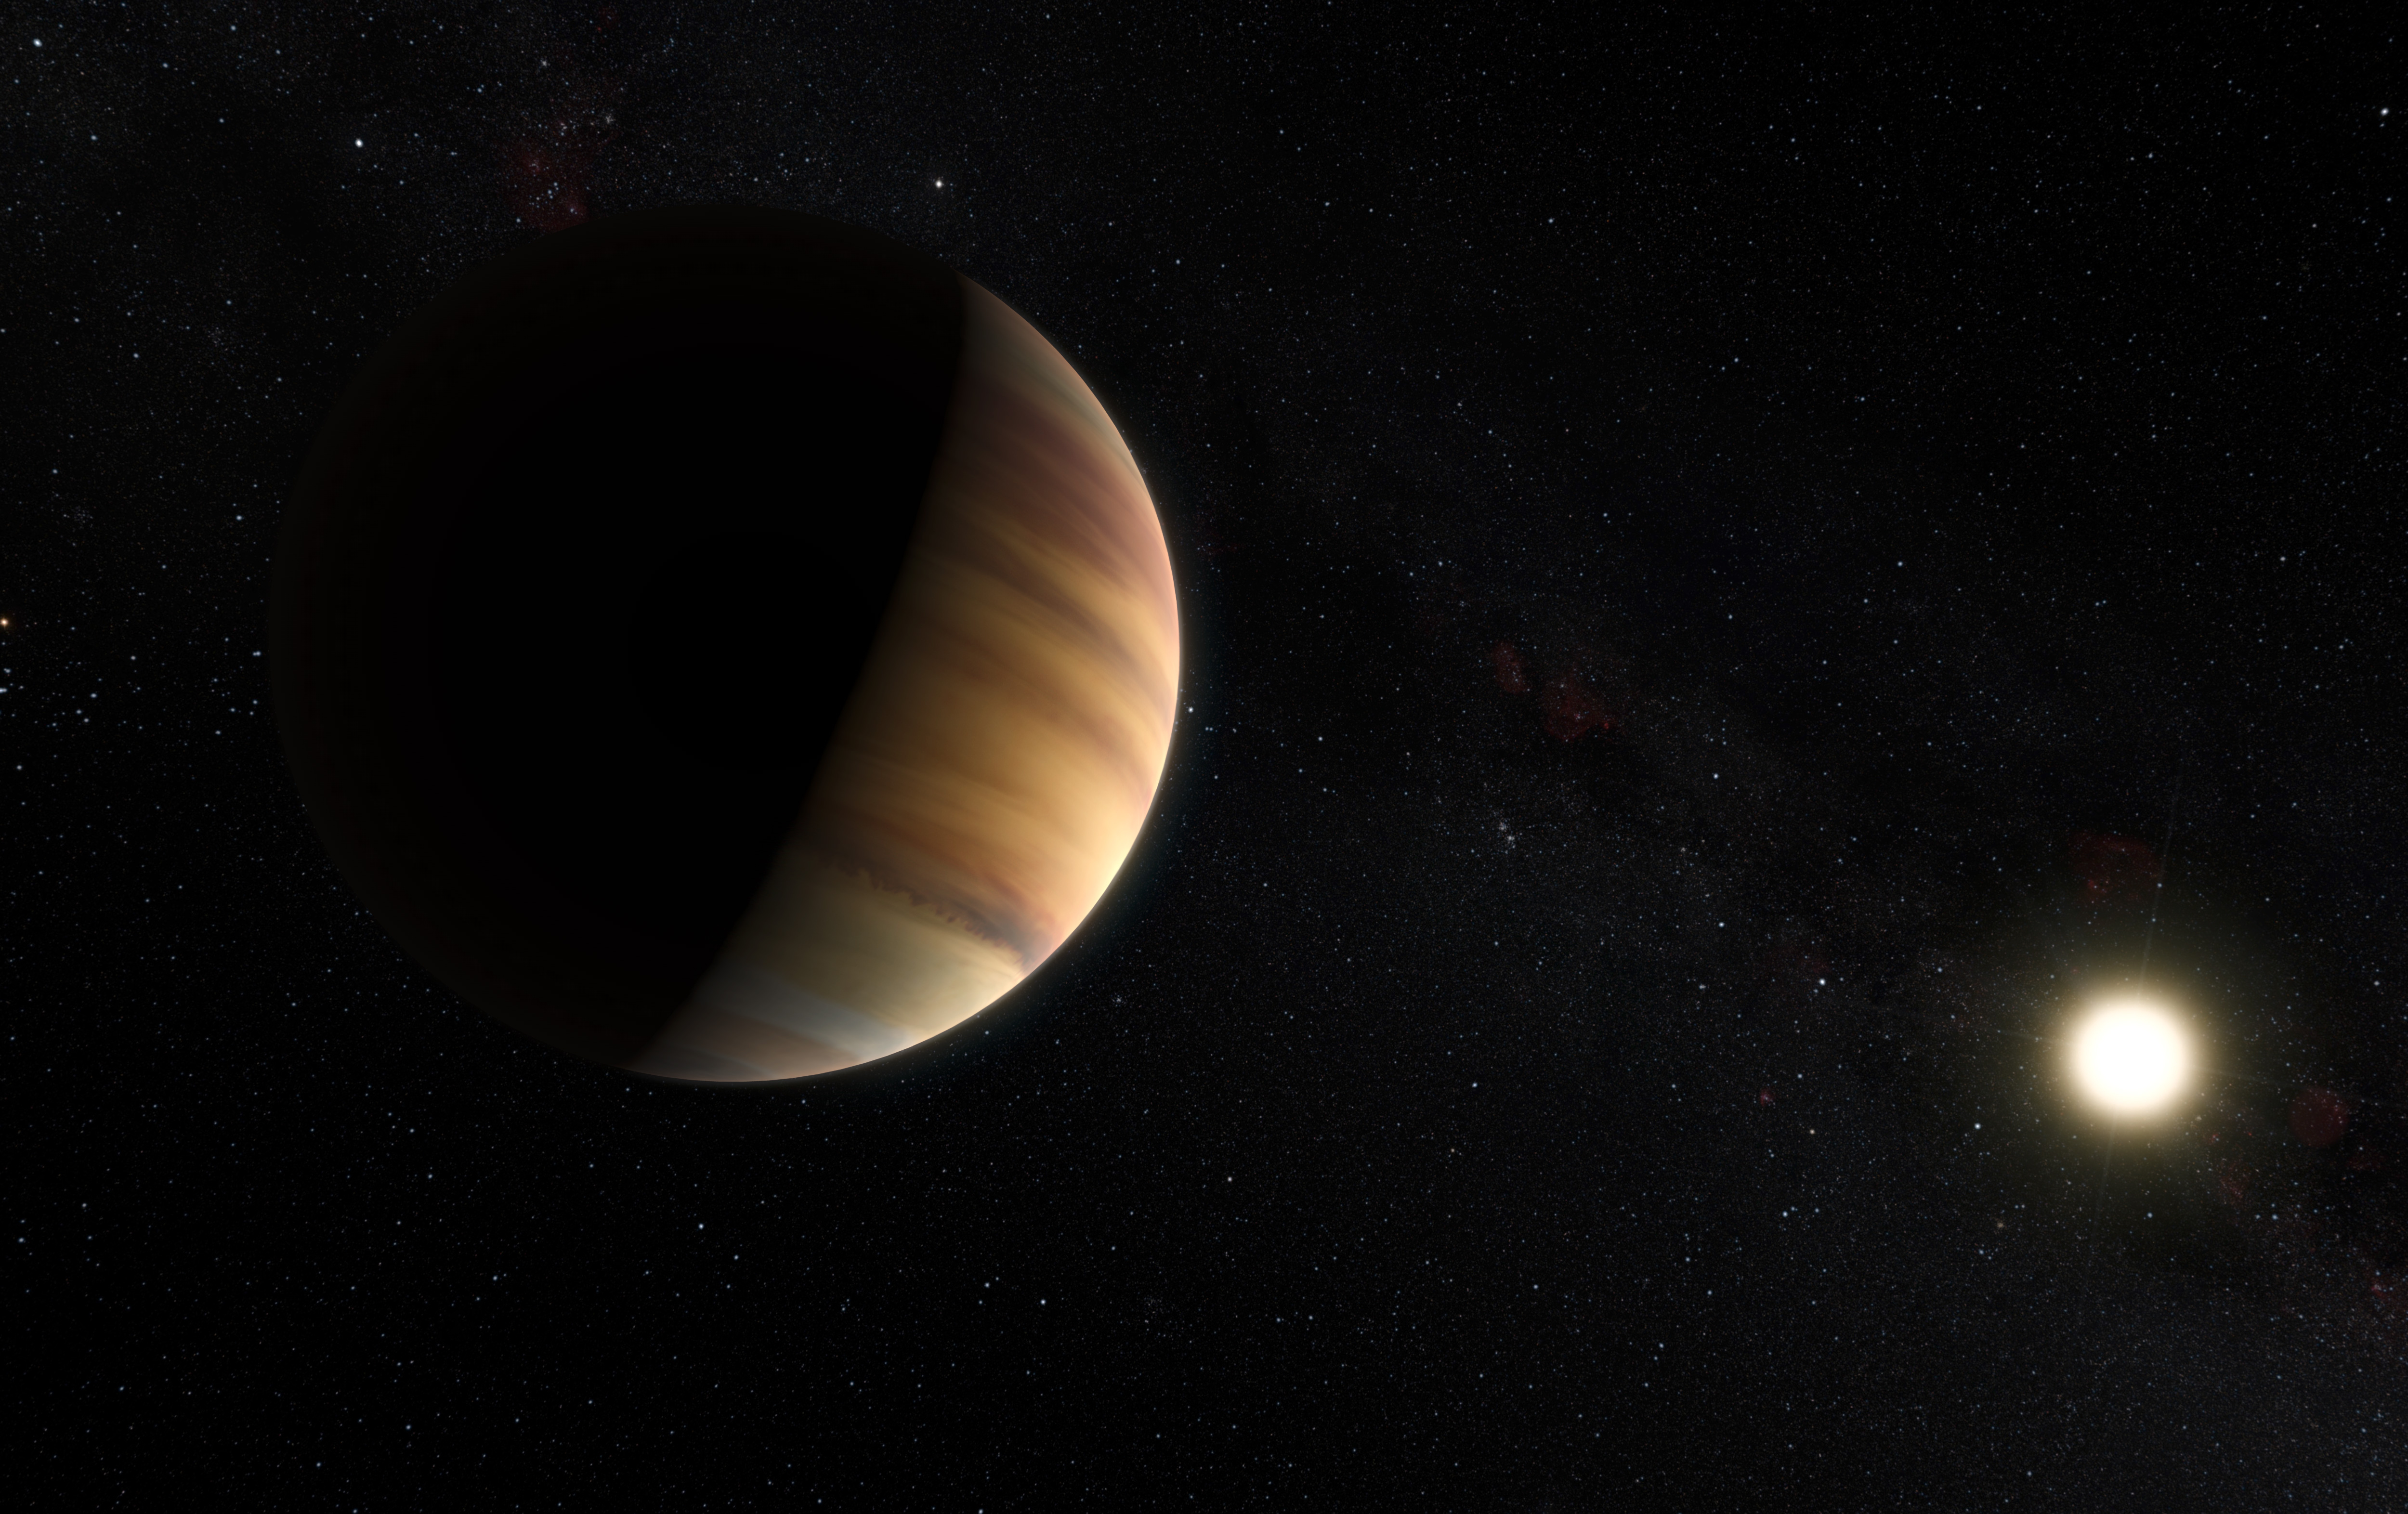 An illustration of the first exoplanet discovered orbiting a sun-like star - 51 Pegasi b.